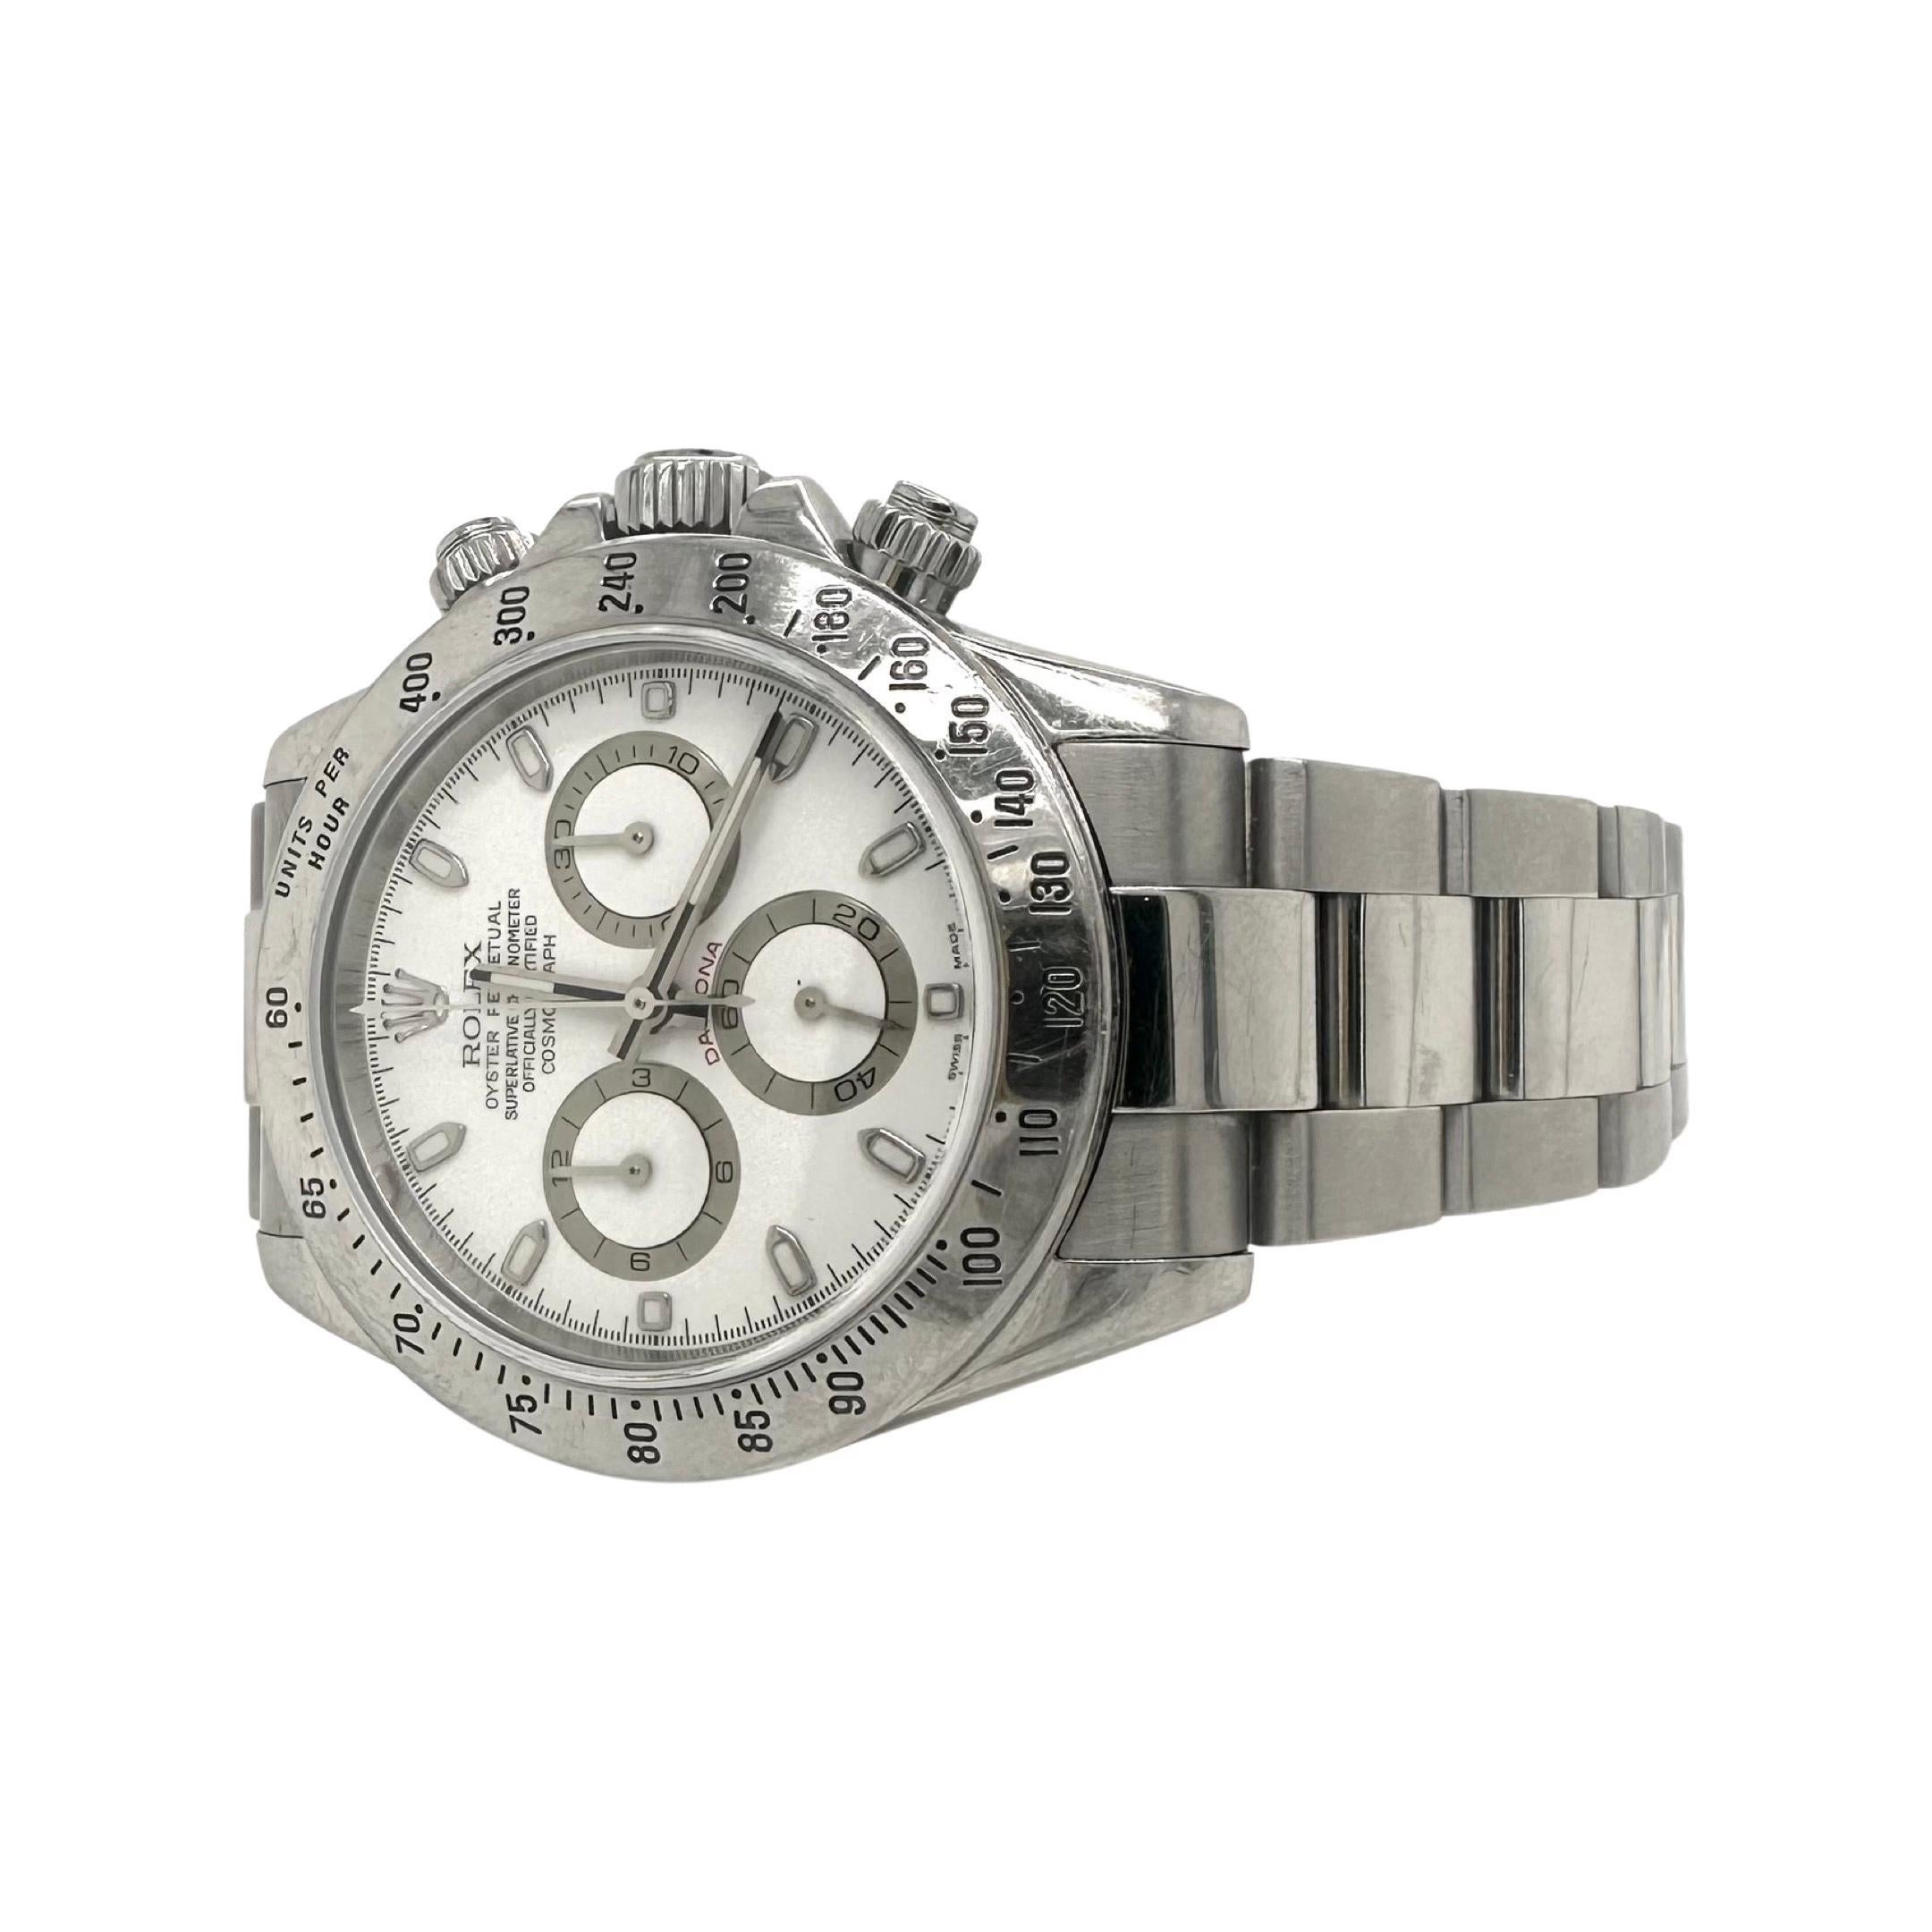 Brand: Rolex

Model Name: Cosmograph Daytona

Model Number: 116520

Movement: Mechanical Automatic

Case Size: 40 mm

Case Material: Stainless Steel 

Bezel: Units Per Hour

Bracelet: Oyster

Dial: White 

Links: 11 

Year: 2007​​​​​3

Includes:  24